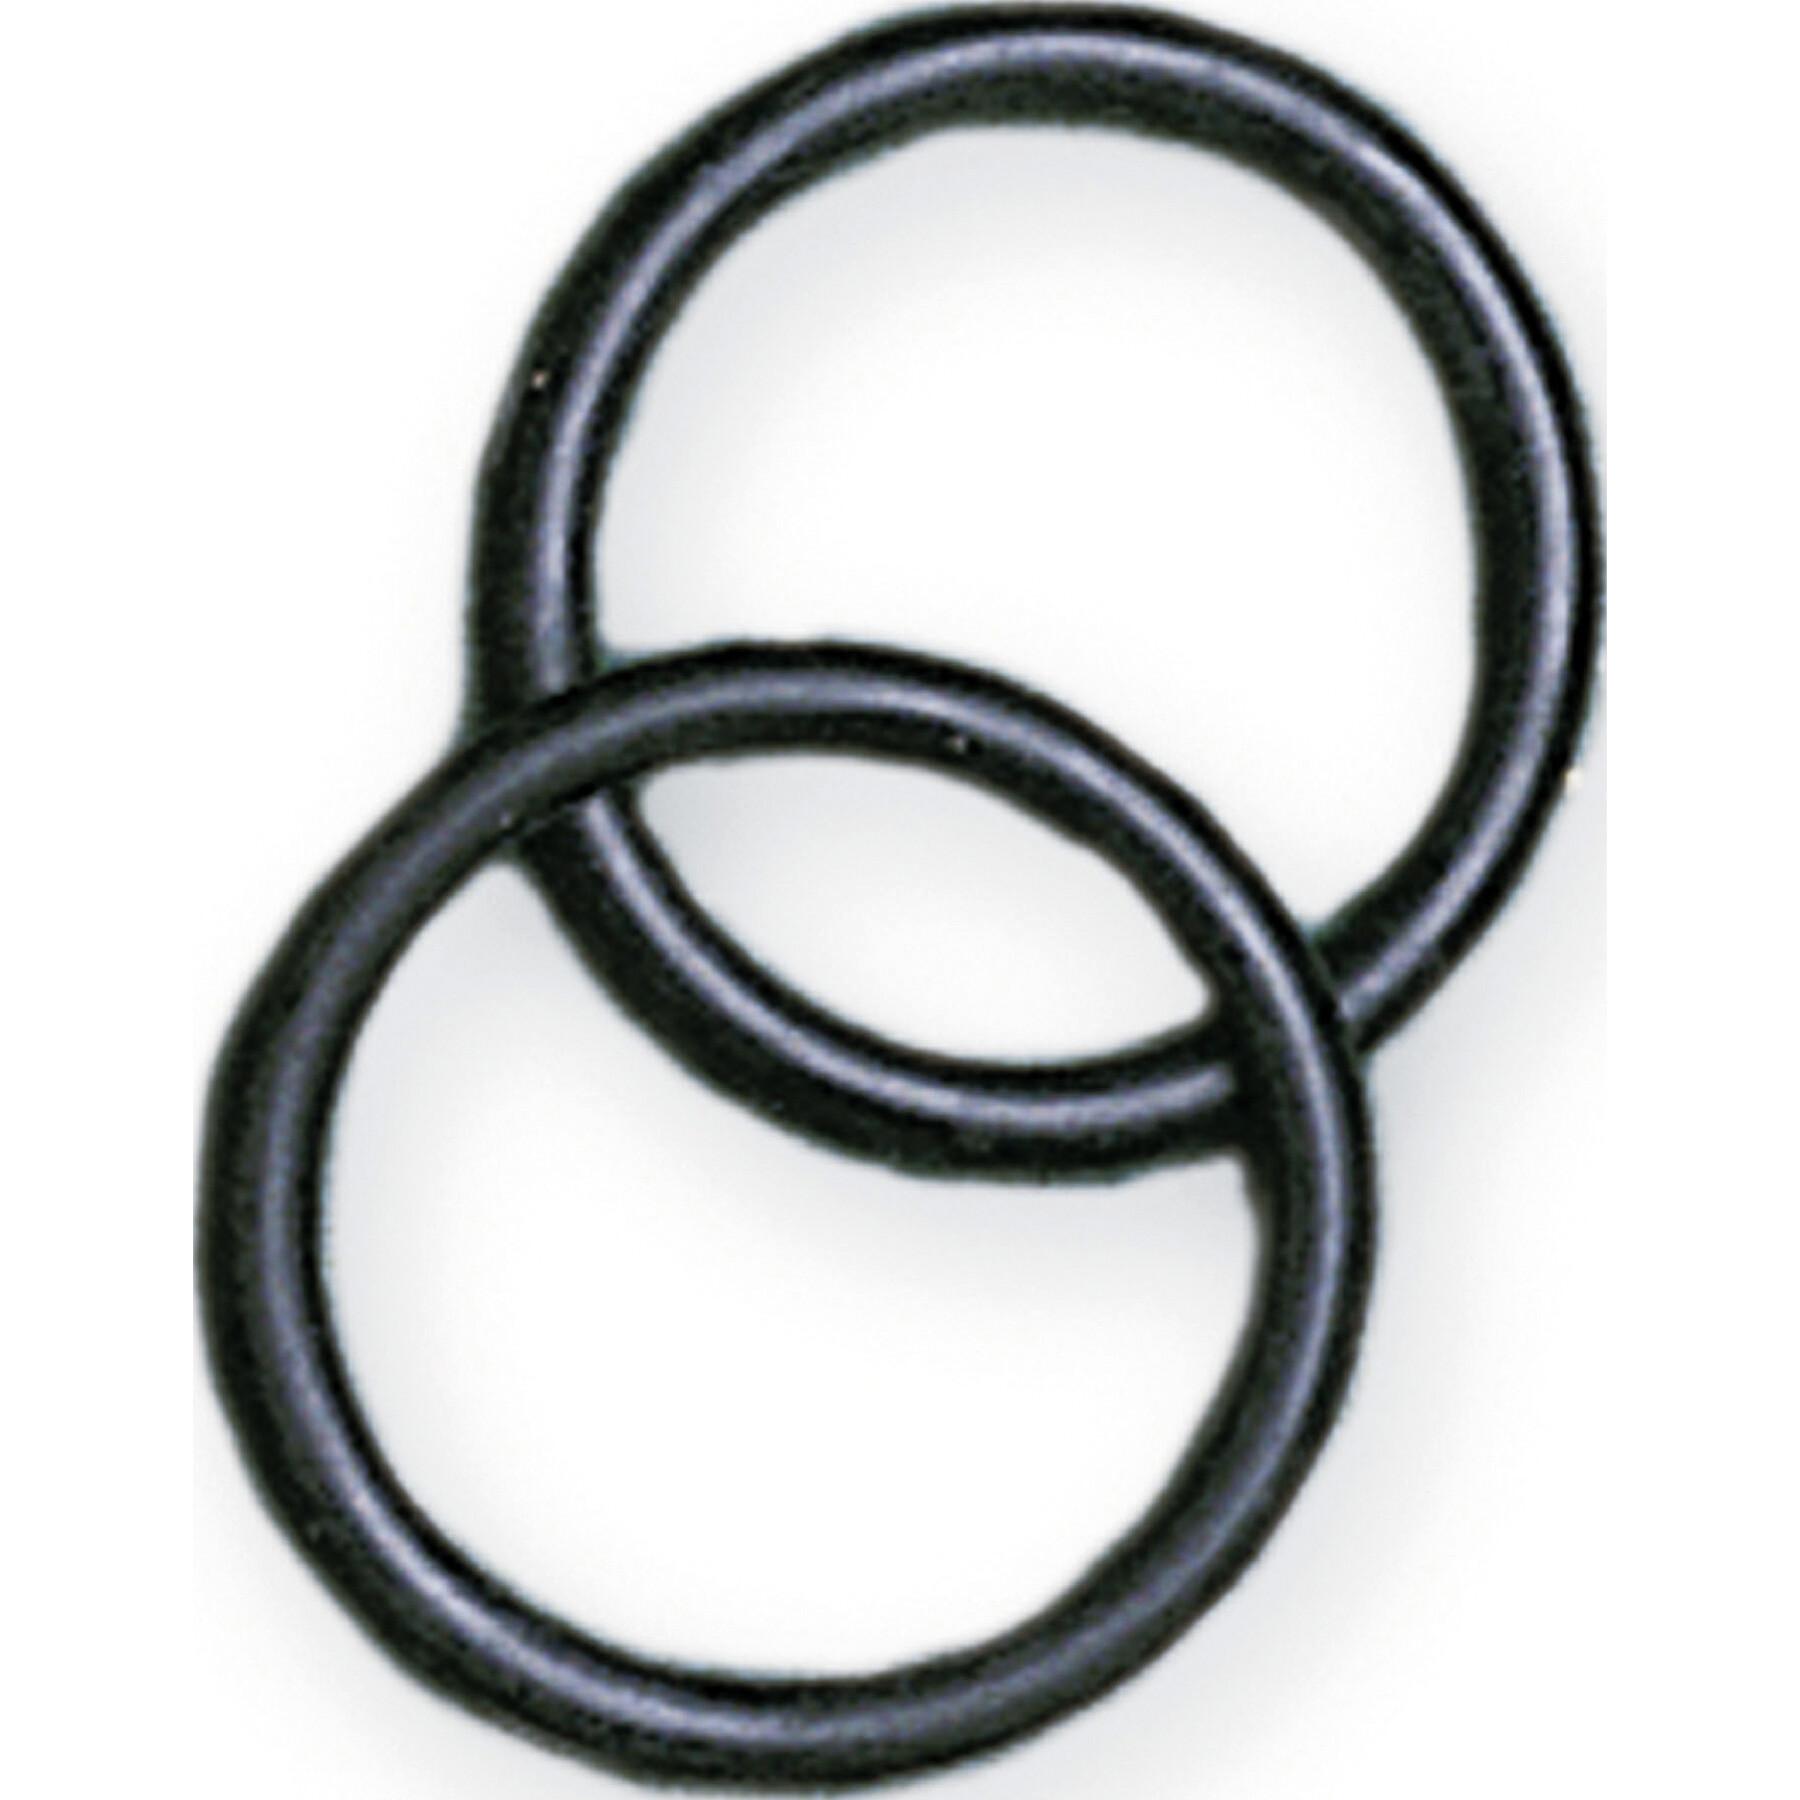 Spare rings for Stirrups HorseGuard